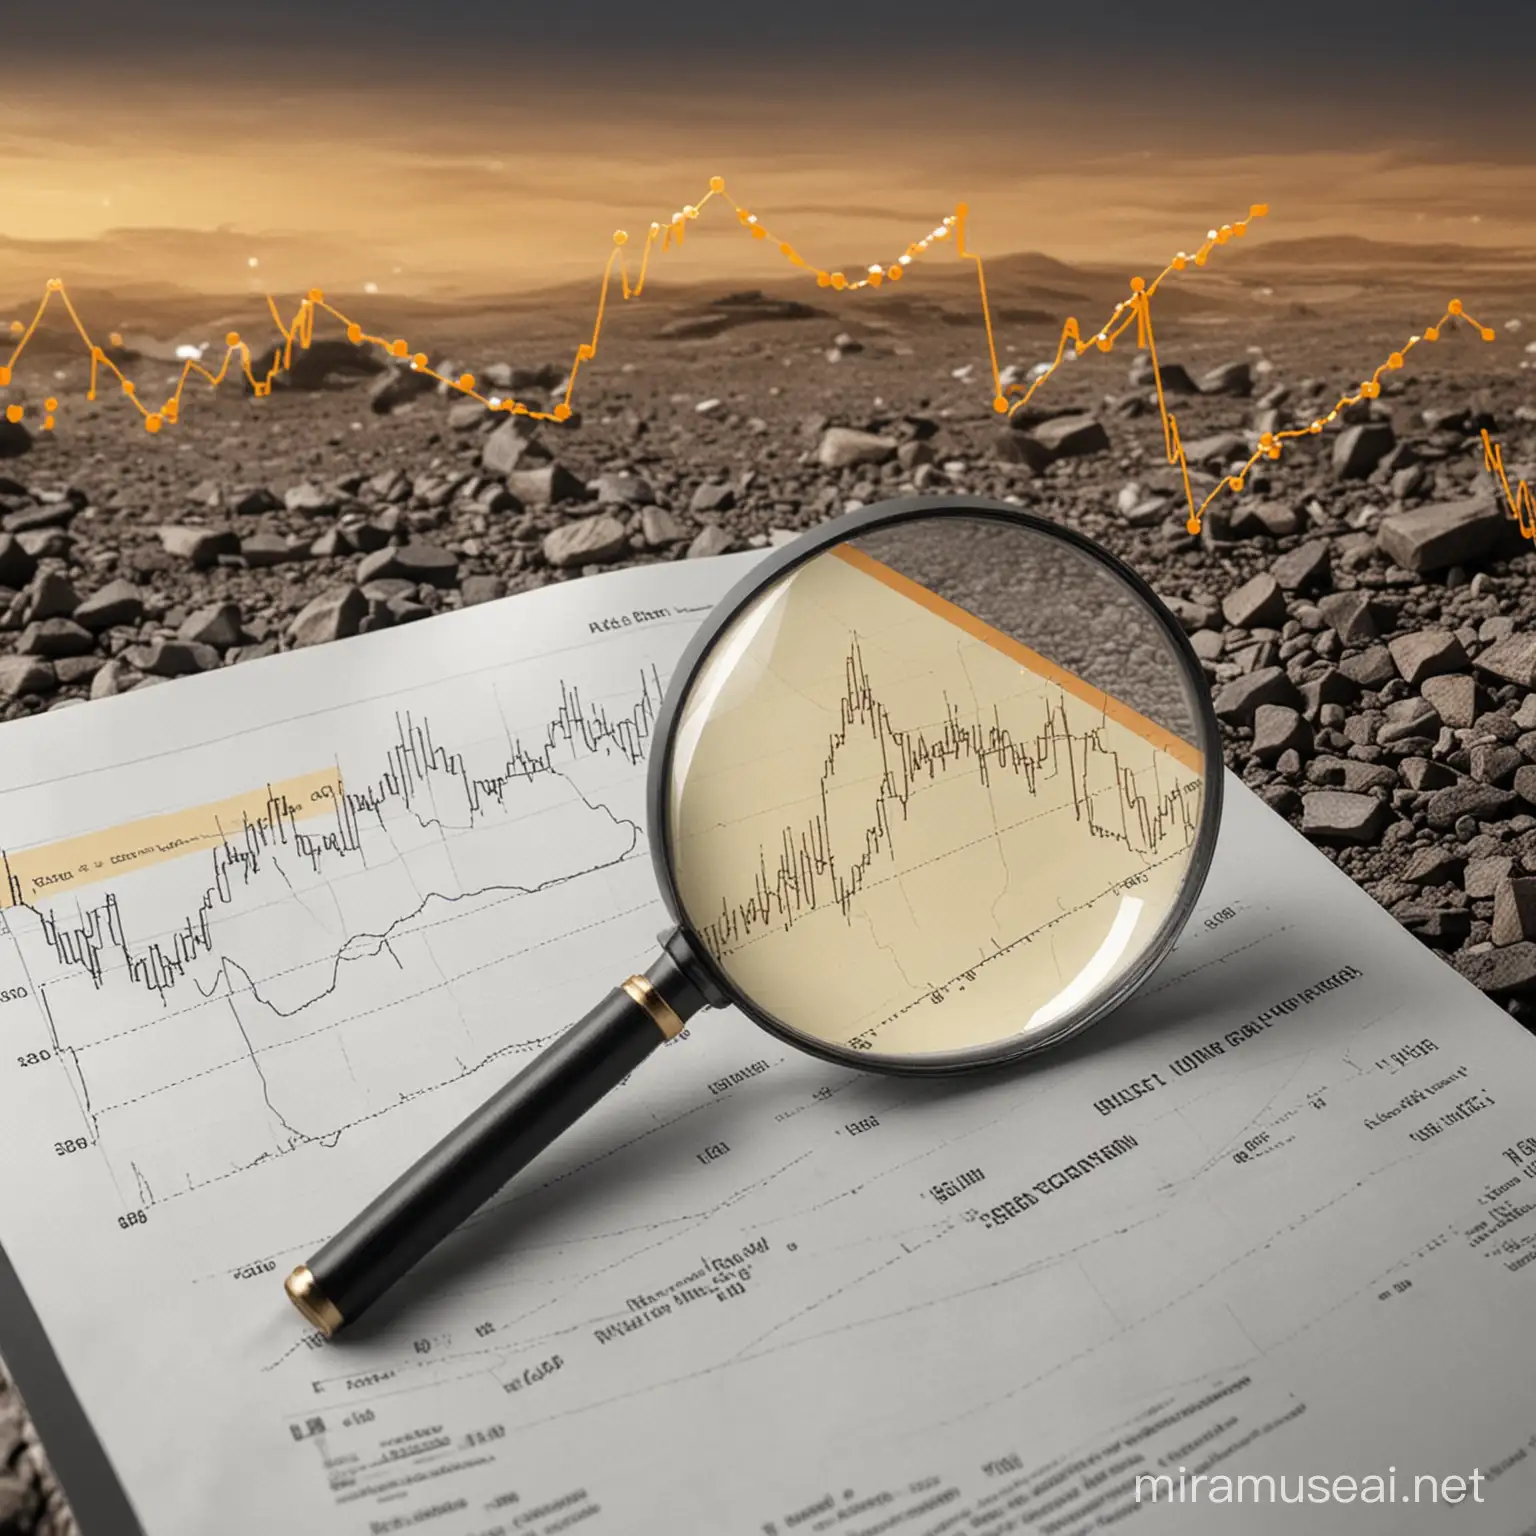 Create a professional and engaging thumbnail image of a simplified upward stock trend line with a magnifying glass focusing on a breakout point, with a clean and modern aesthetic. Incorporate a minimal color palette that matches ProInvestor.no branding (among other yellow/orange to signal success). The background should be clean with few distractions, and the design should be appropriate for a finance and investment context. It must be appealing, This should be used for a thumbnail to an article of the analysis of the day where the stock is Rana Gruber AS (norwegian mining stock)